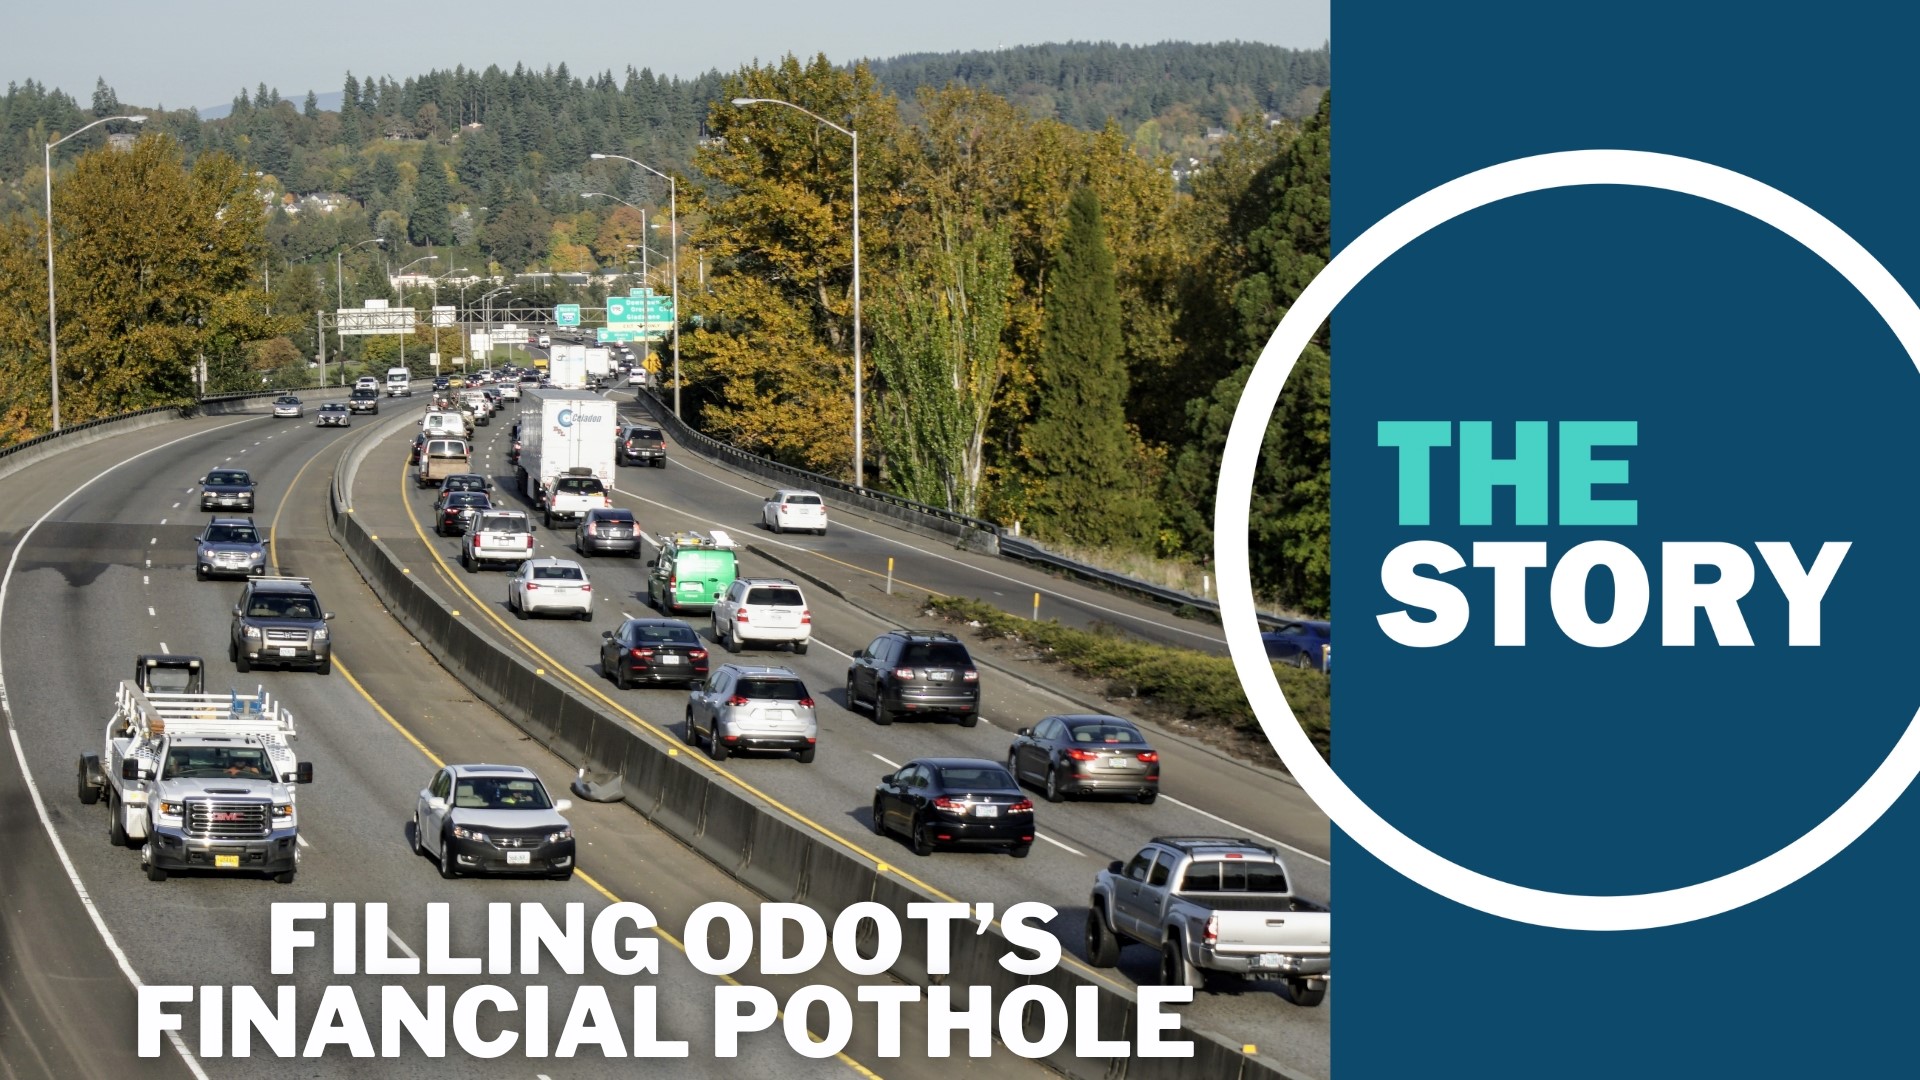 With tolling shelved for now, ODOT Director Kris Strickler finds himself at the head of an agency still desperately in need of sustainable funding sources.